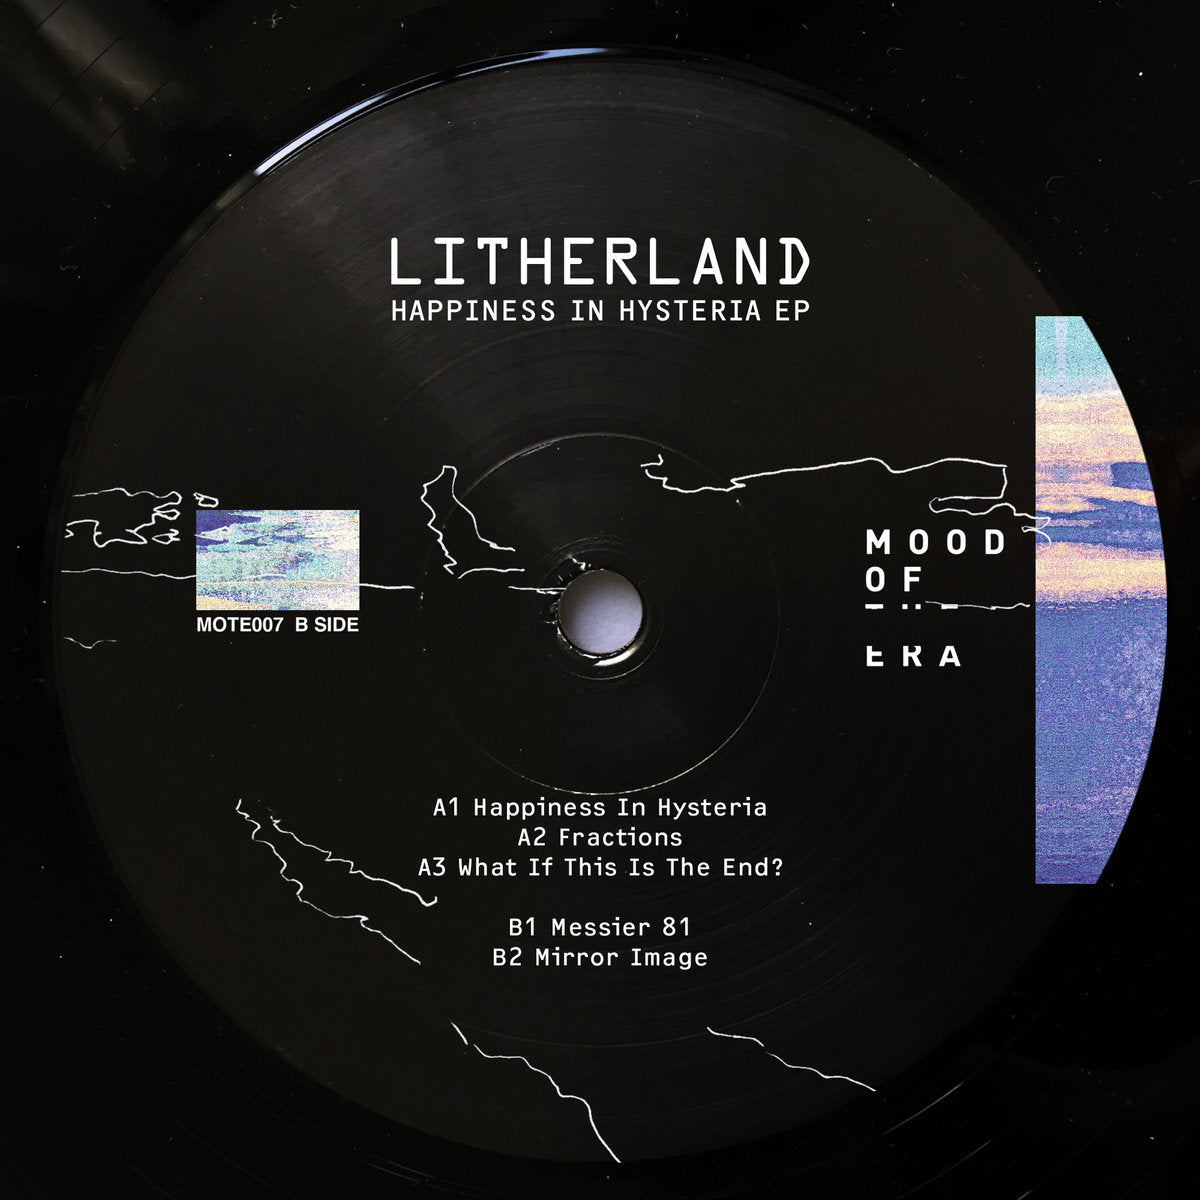 Happiness In Hysteria EP 12" by Litherland